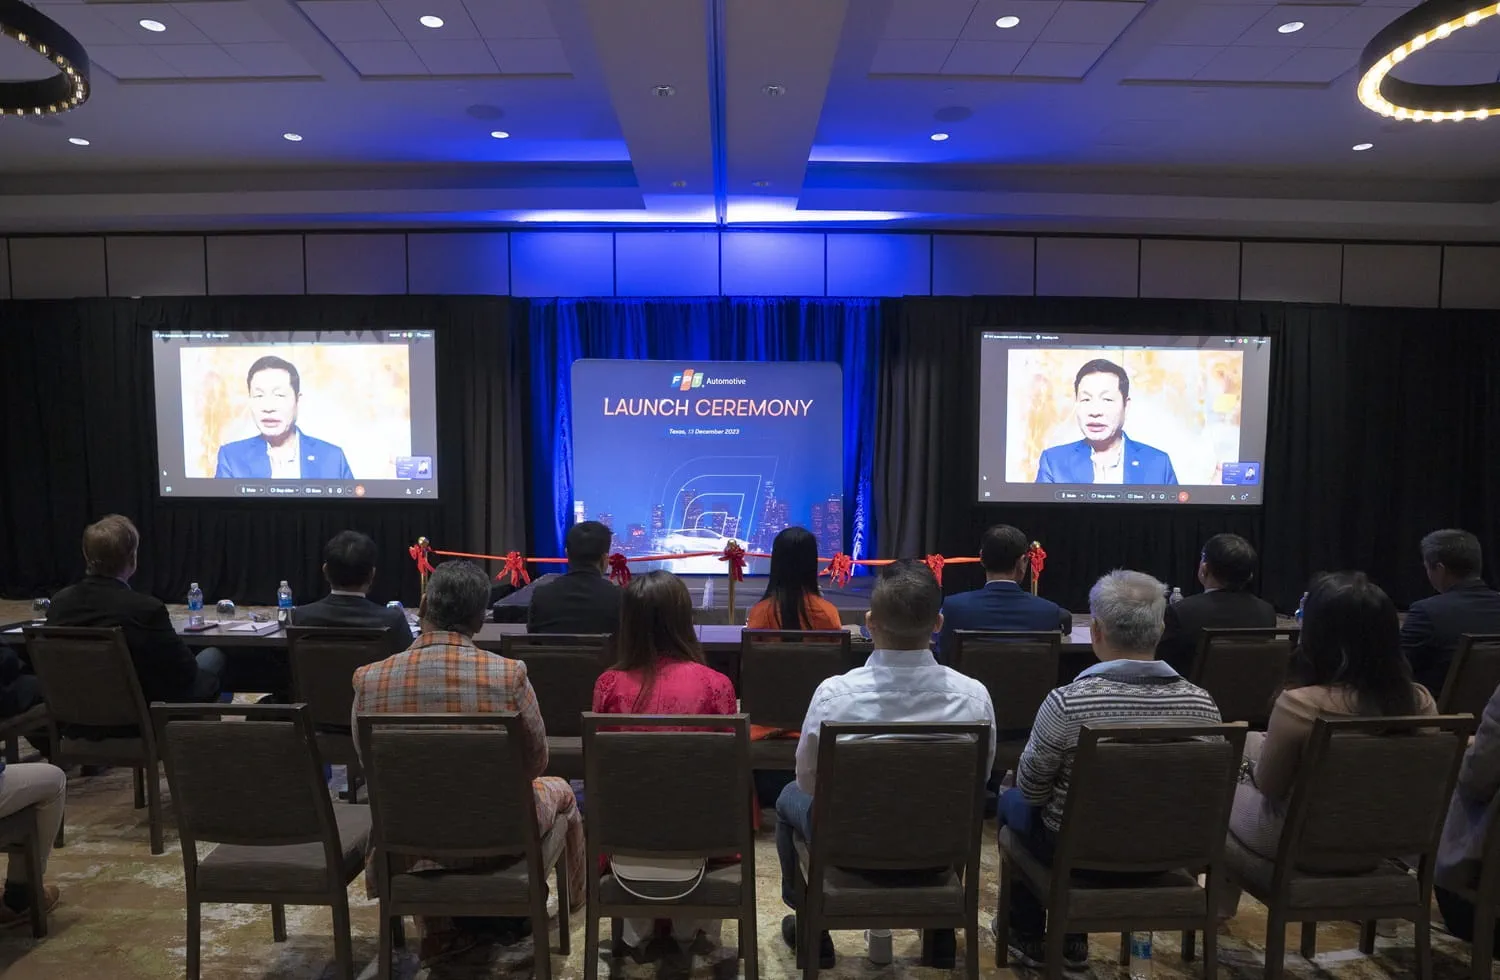 FPT Corporation Founder and Chairman, Dr. Truong Gia Binh joined the event virtually from Hanoi, Vietnam